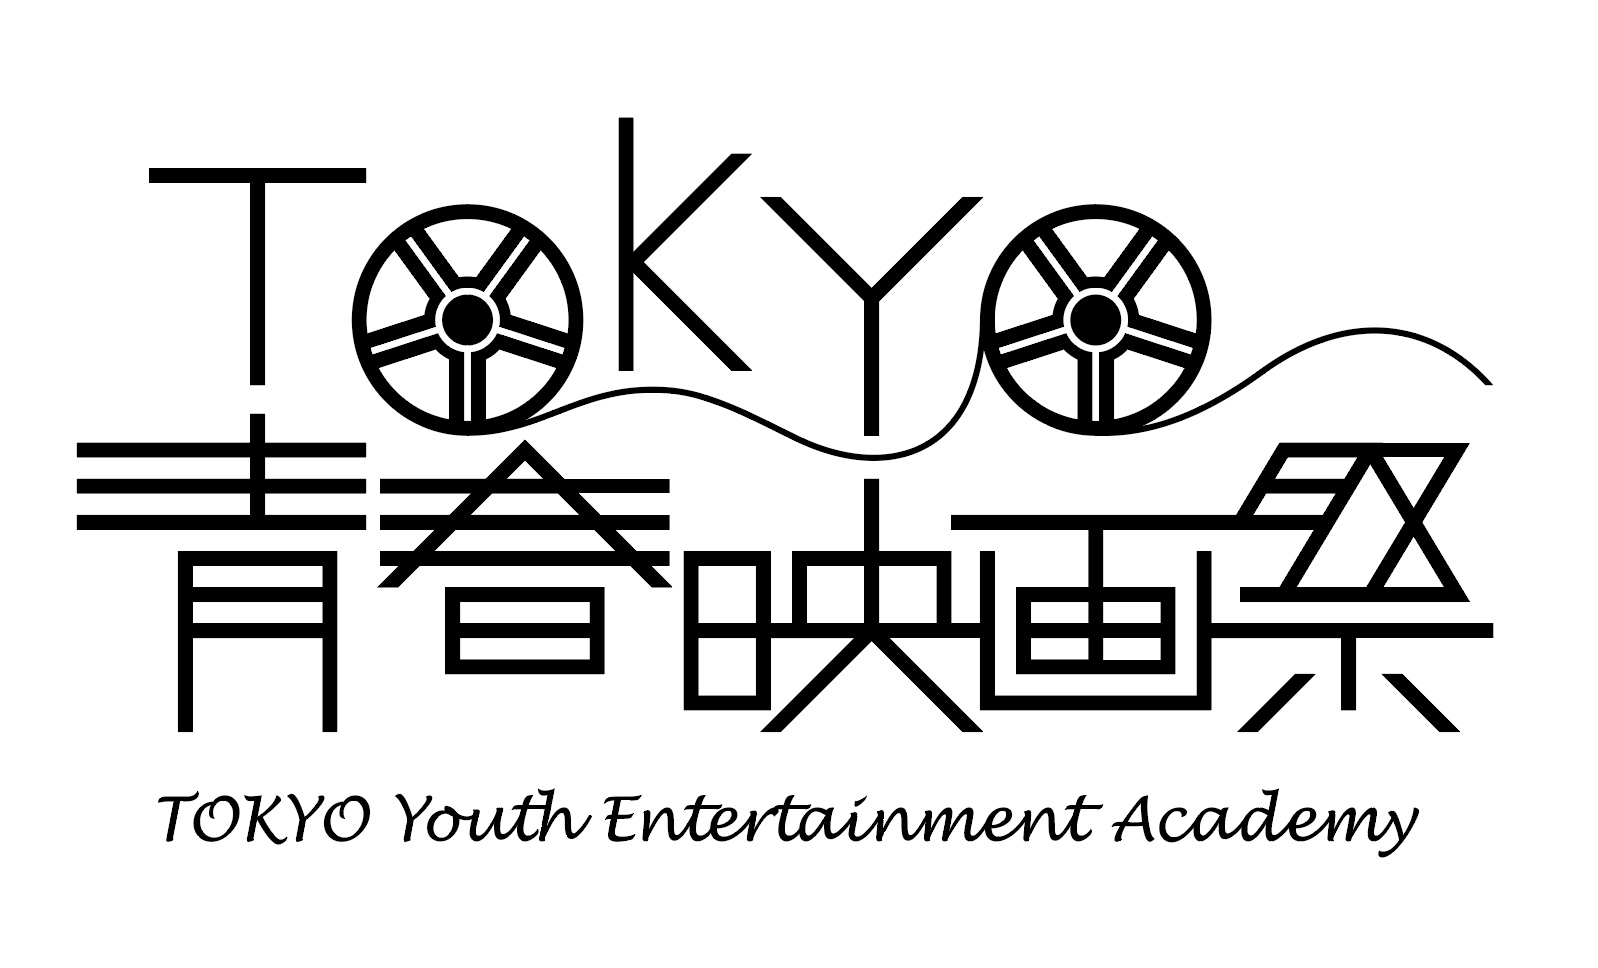 TOKYO Youth Entertainment Academy